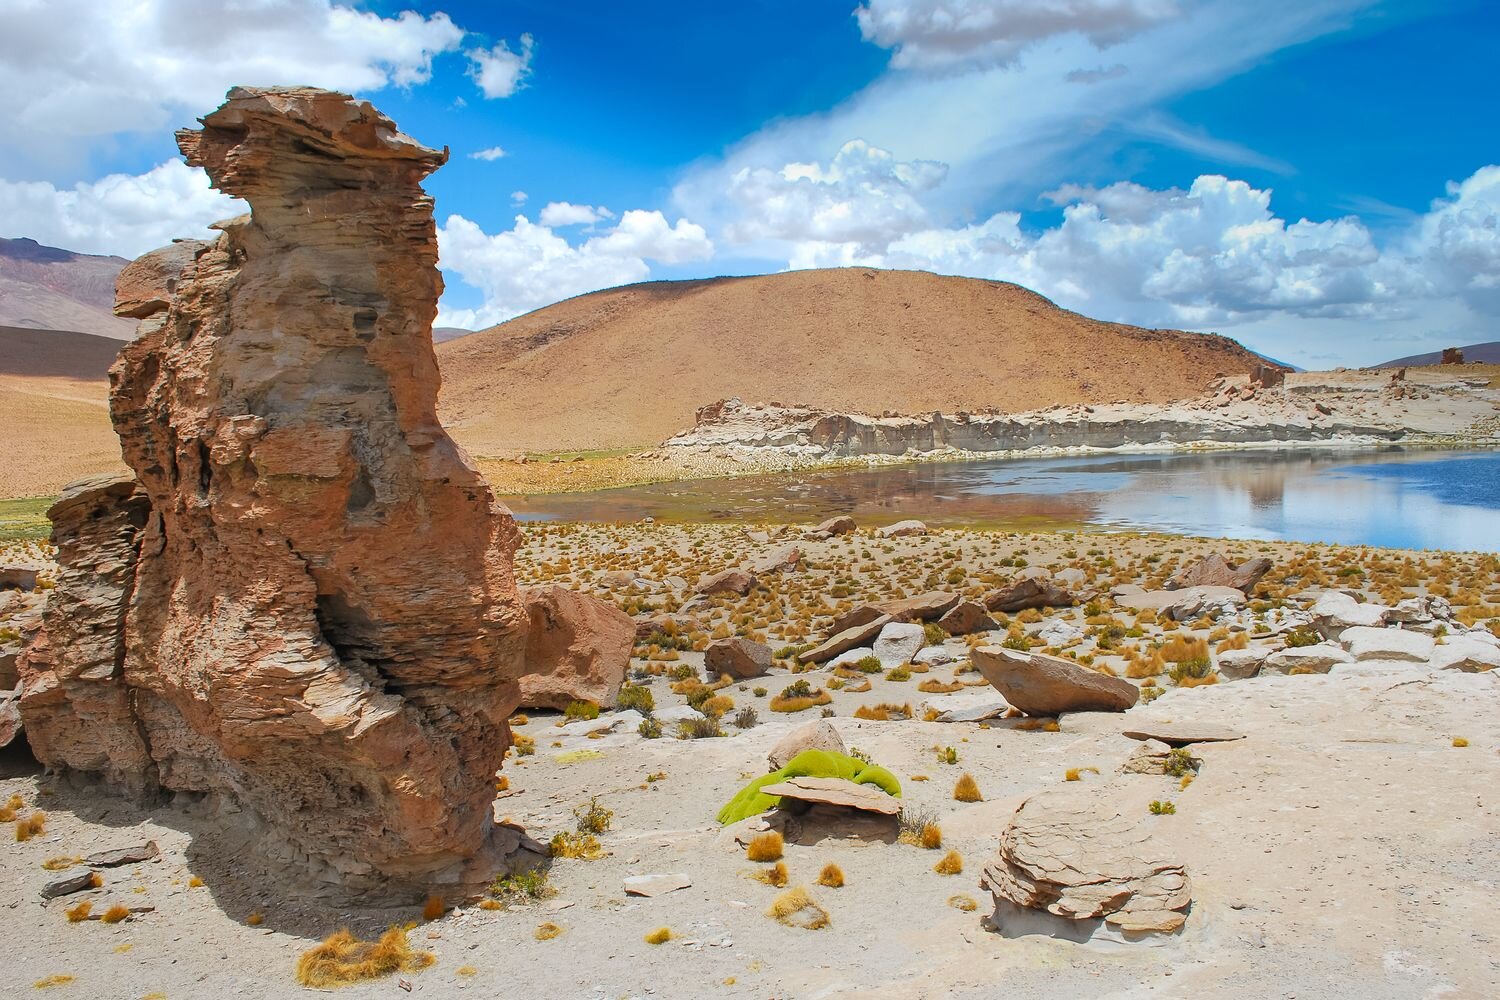  Andean landscape, with ignimbrita rocks and lagoons  